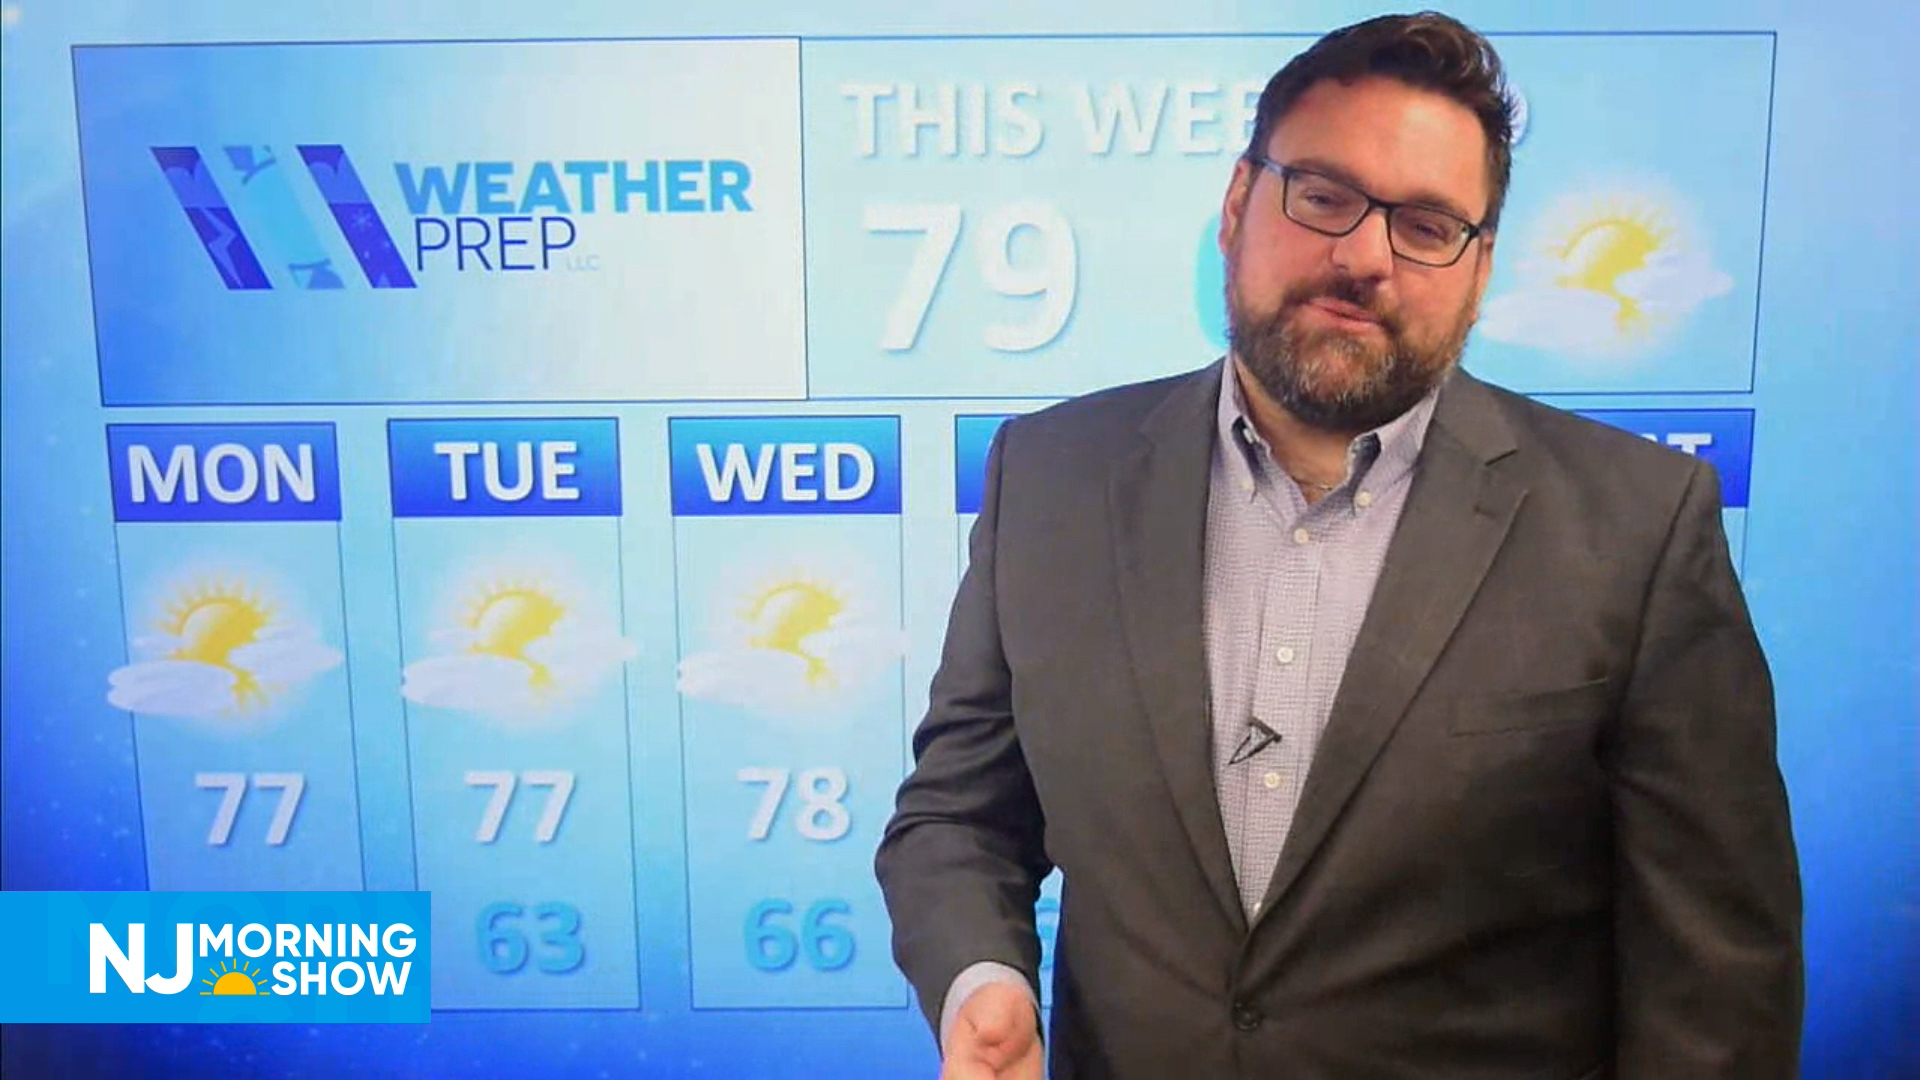 NJ Morning Show – 7 Day Forcast